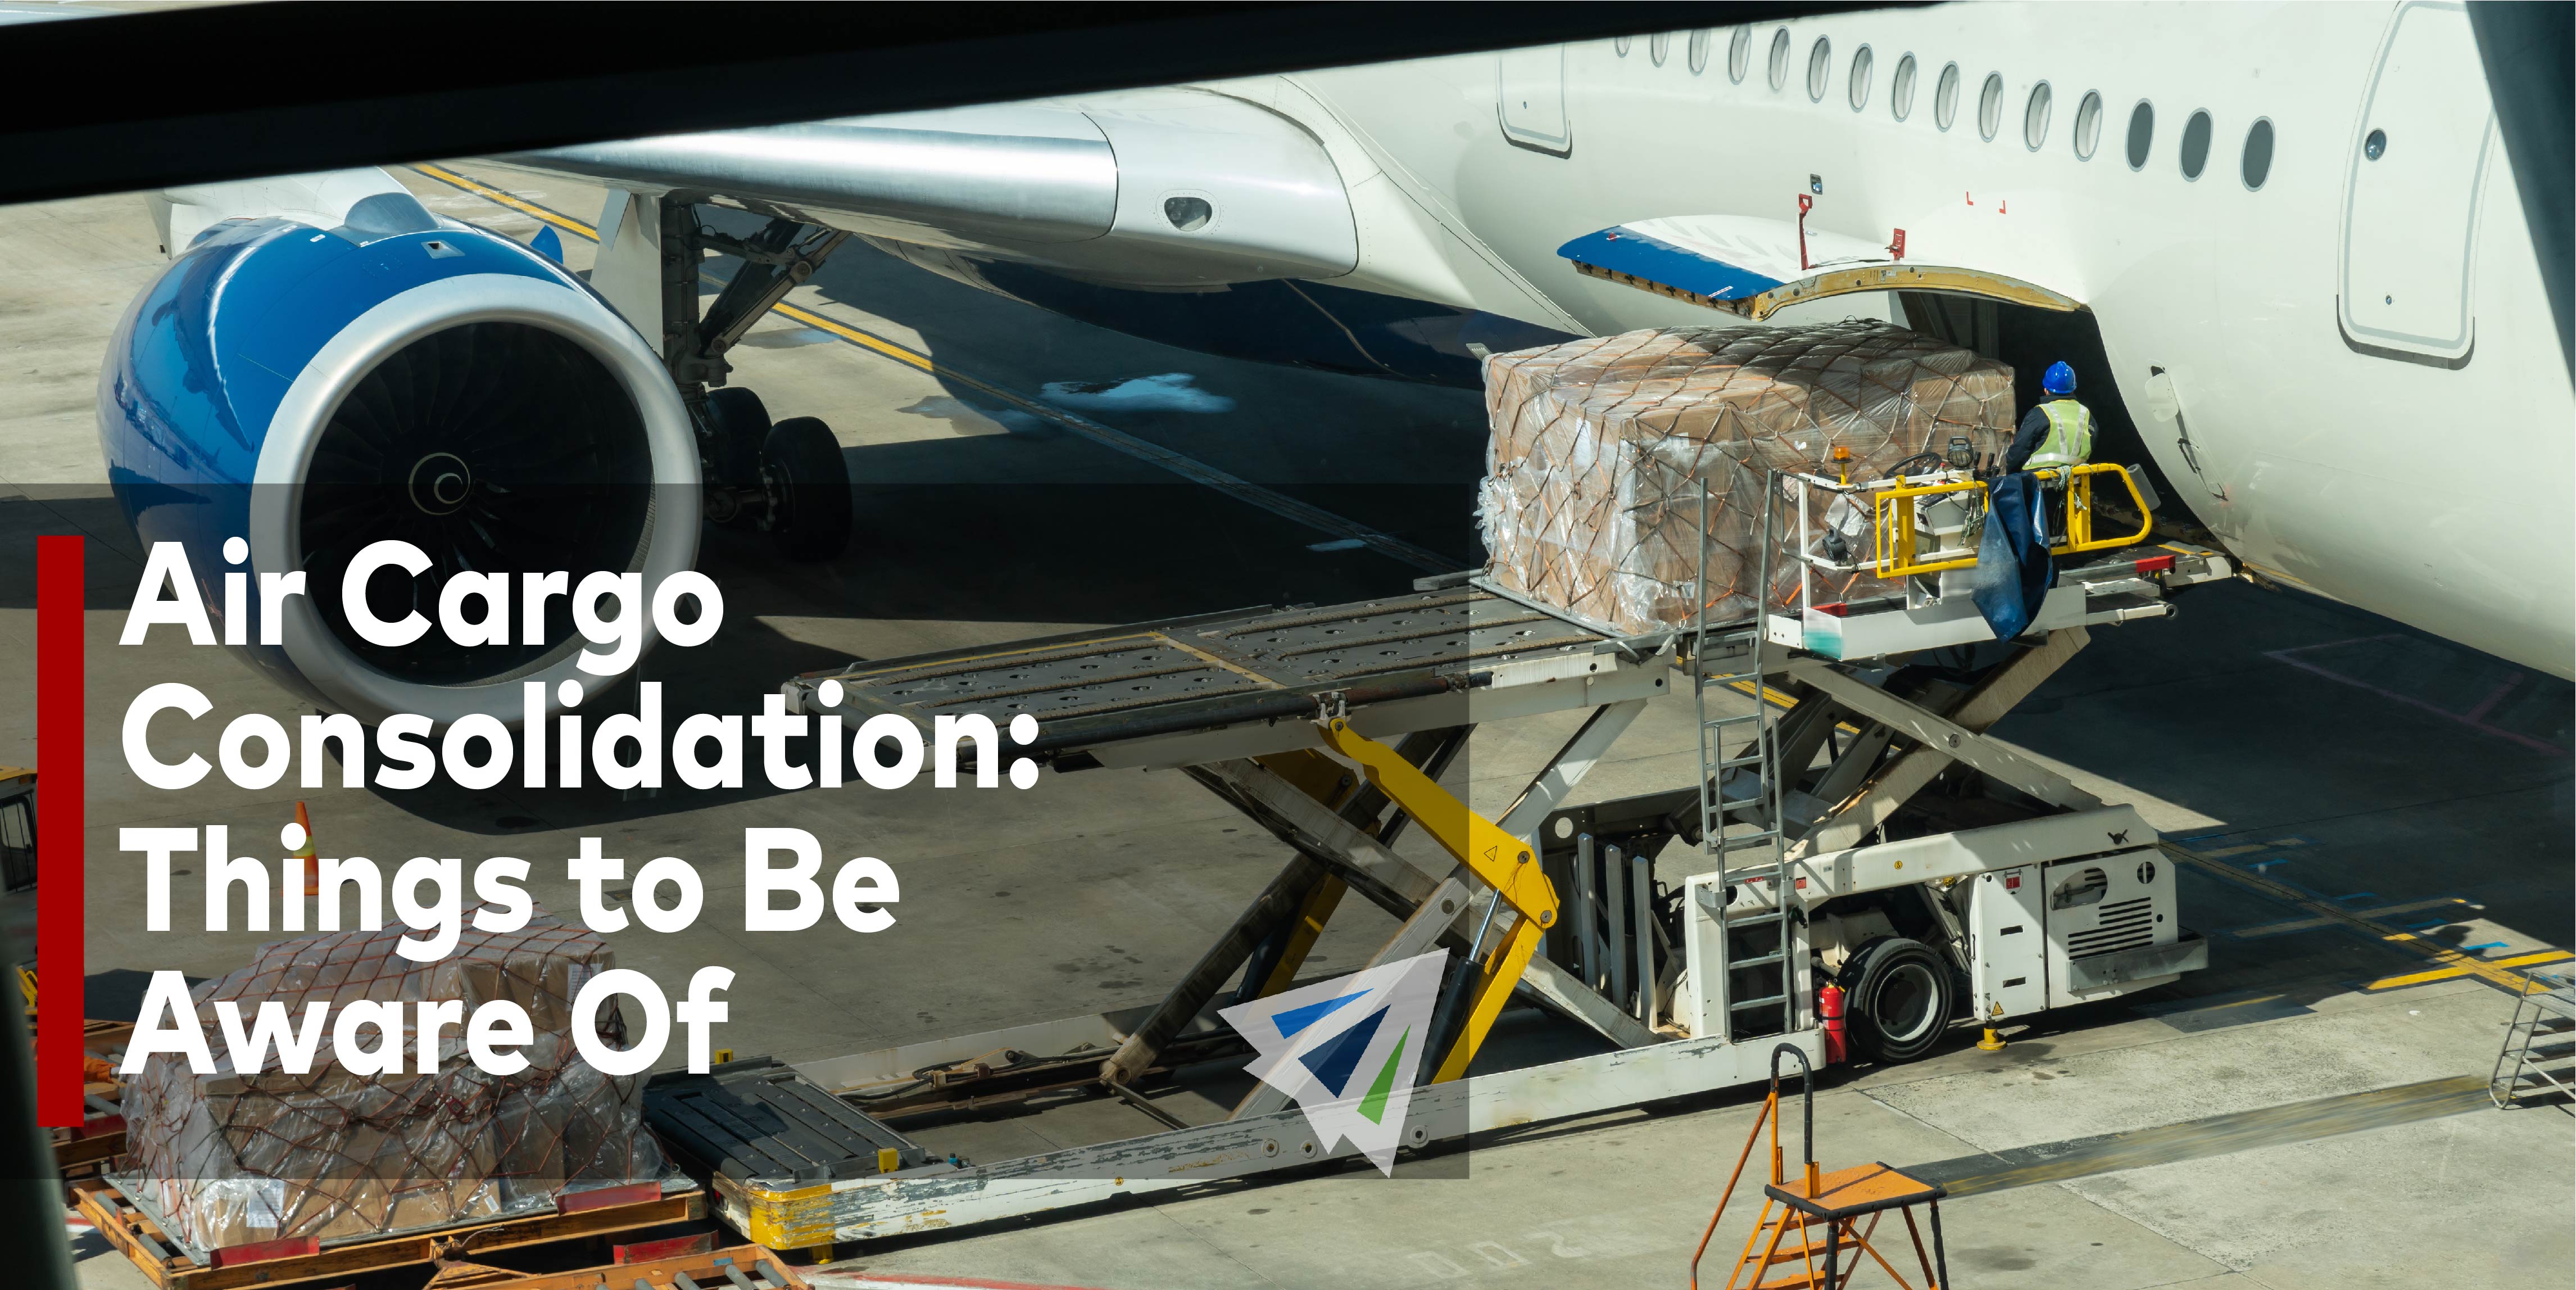 Air Cargo Consolidation: Things to Be Aware Of